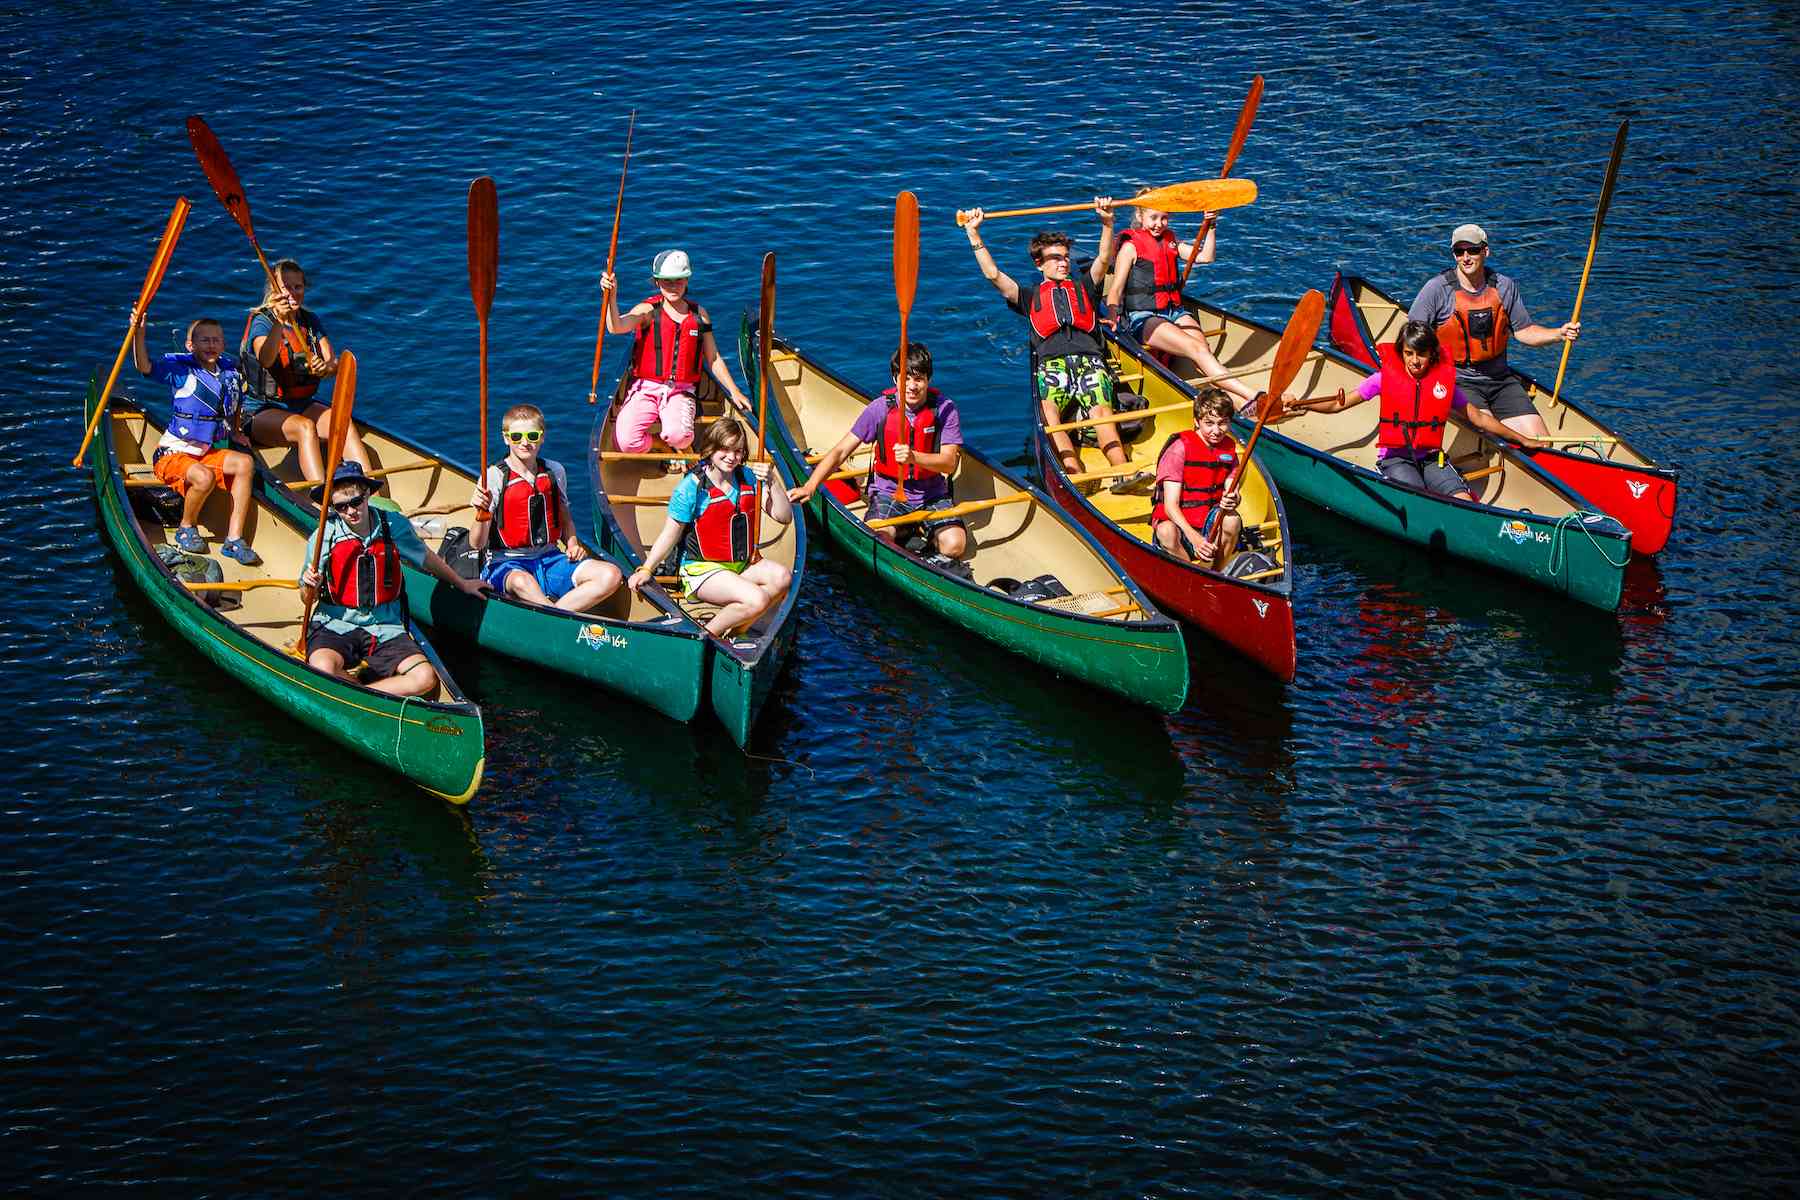 Campers and their instructors all raise their paddles to the camera in seven side by side canoes.